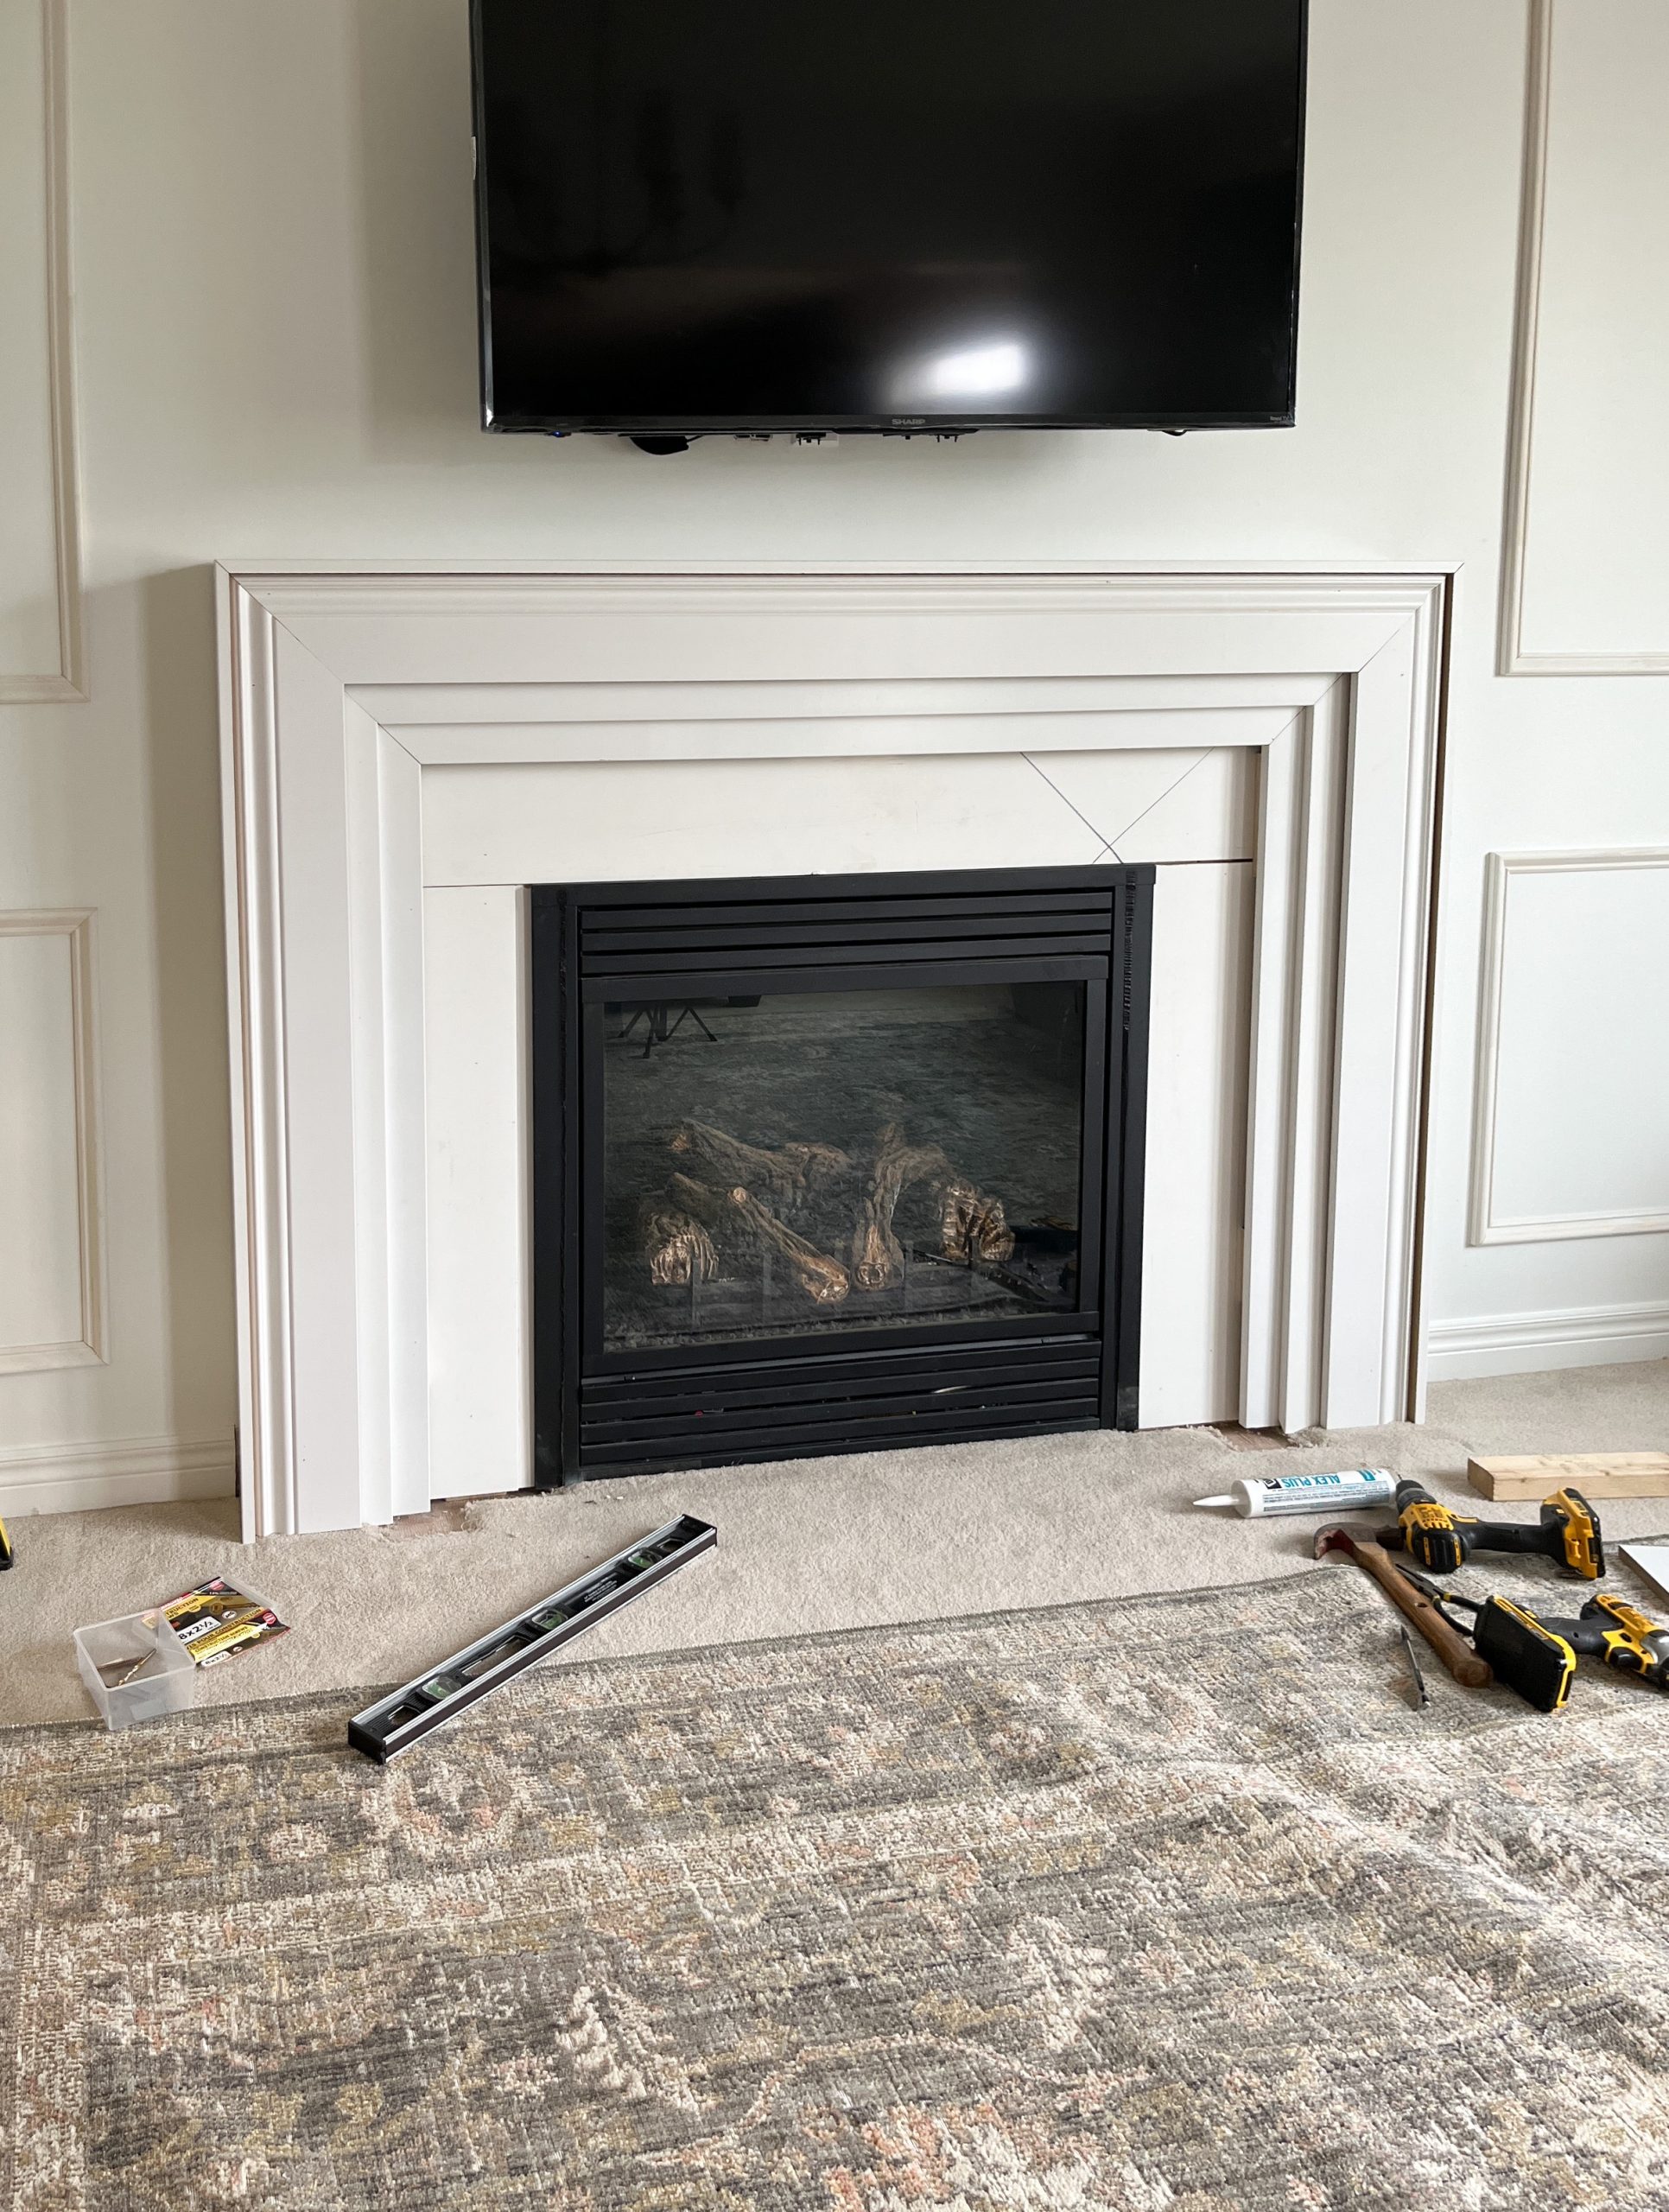 7 DIY Fireplace Mantel Ideas to Create a More Stylish Focal Point